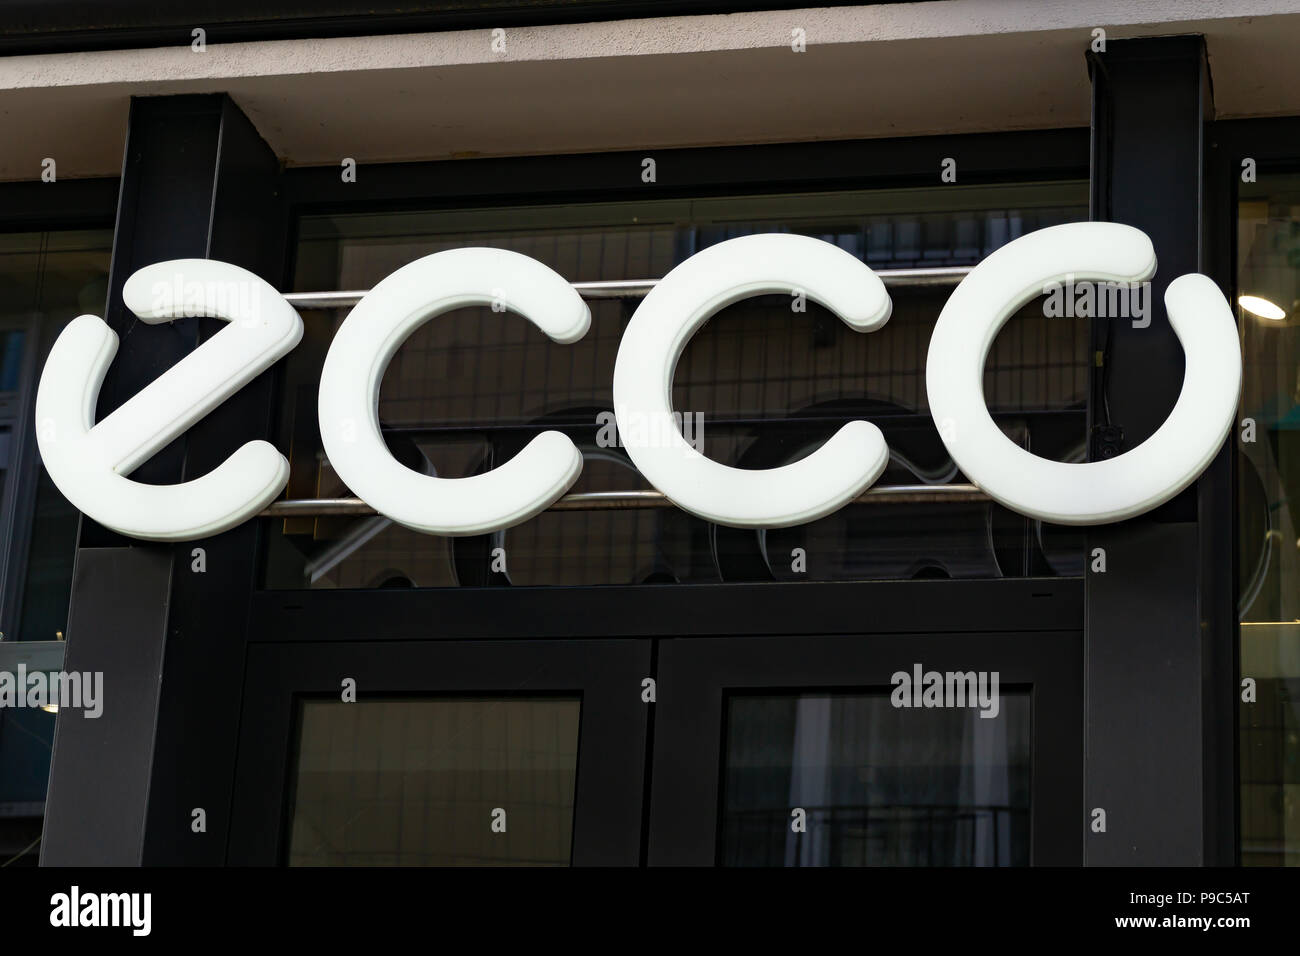 Ecco shop sign hi-res stock photography and images - Alamy